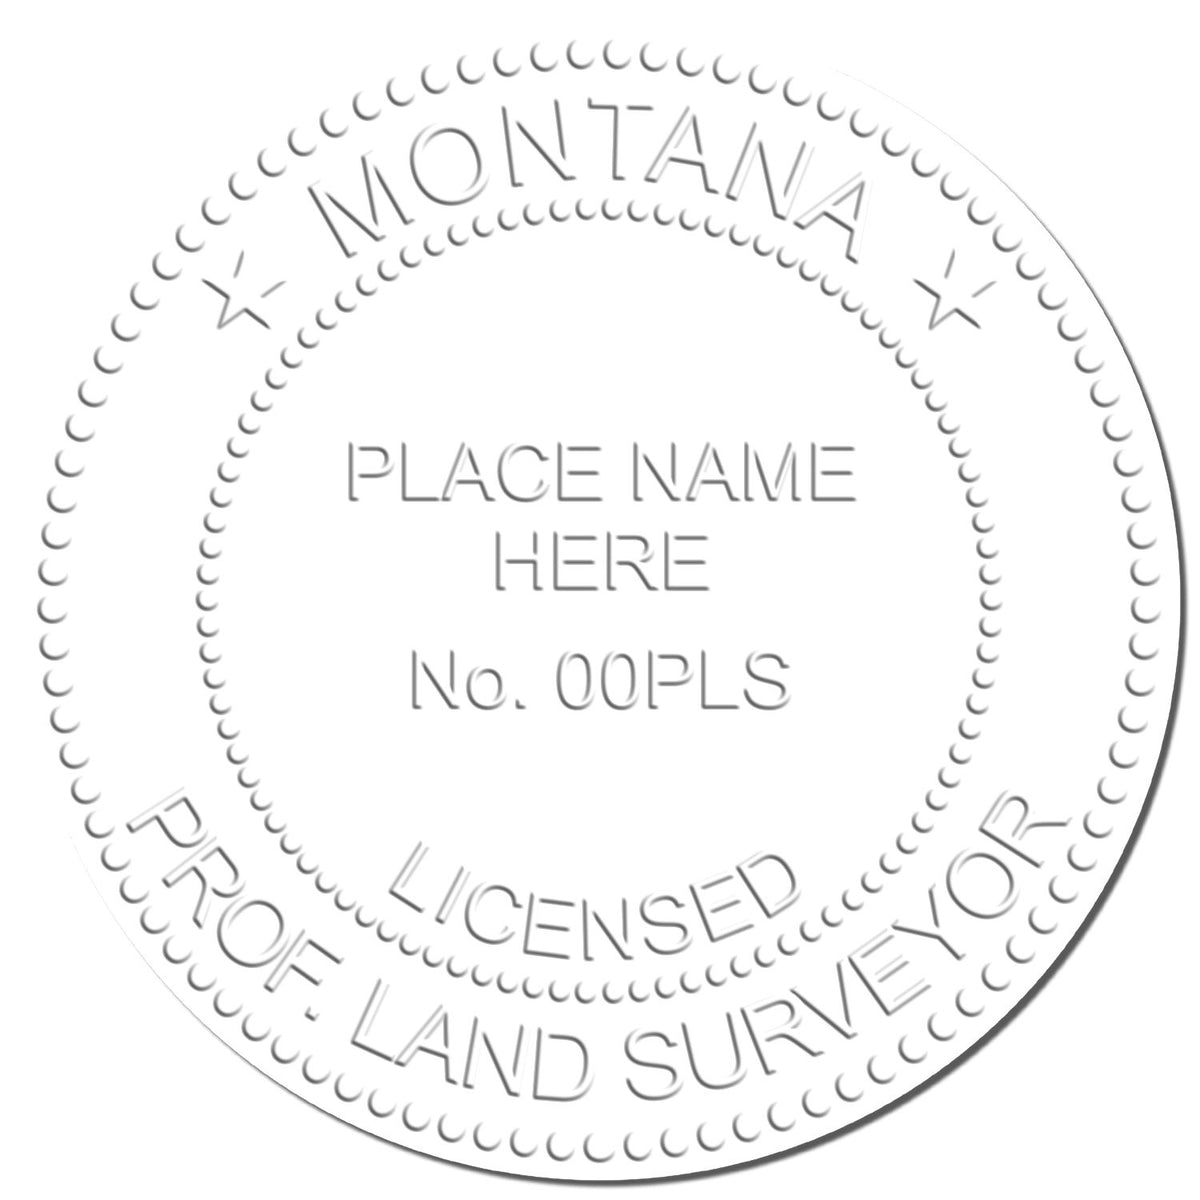 This paper is stamped with a sample imprint of the Handheld Montana Land Surveyor Seal, signifying its quality and reliability.